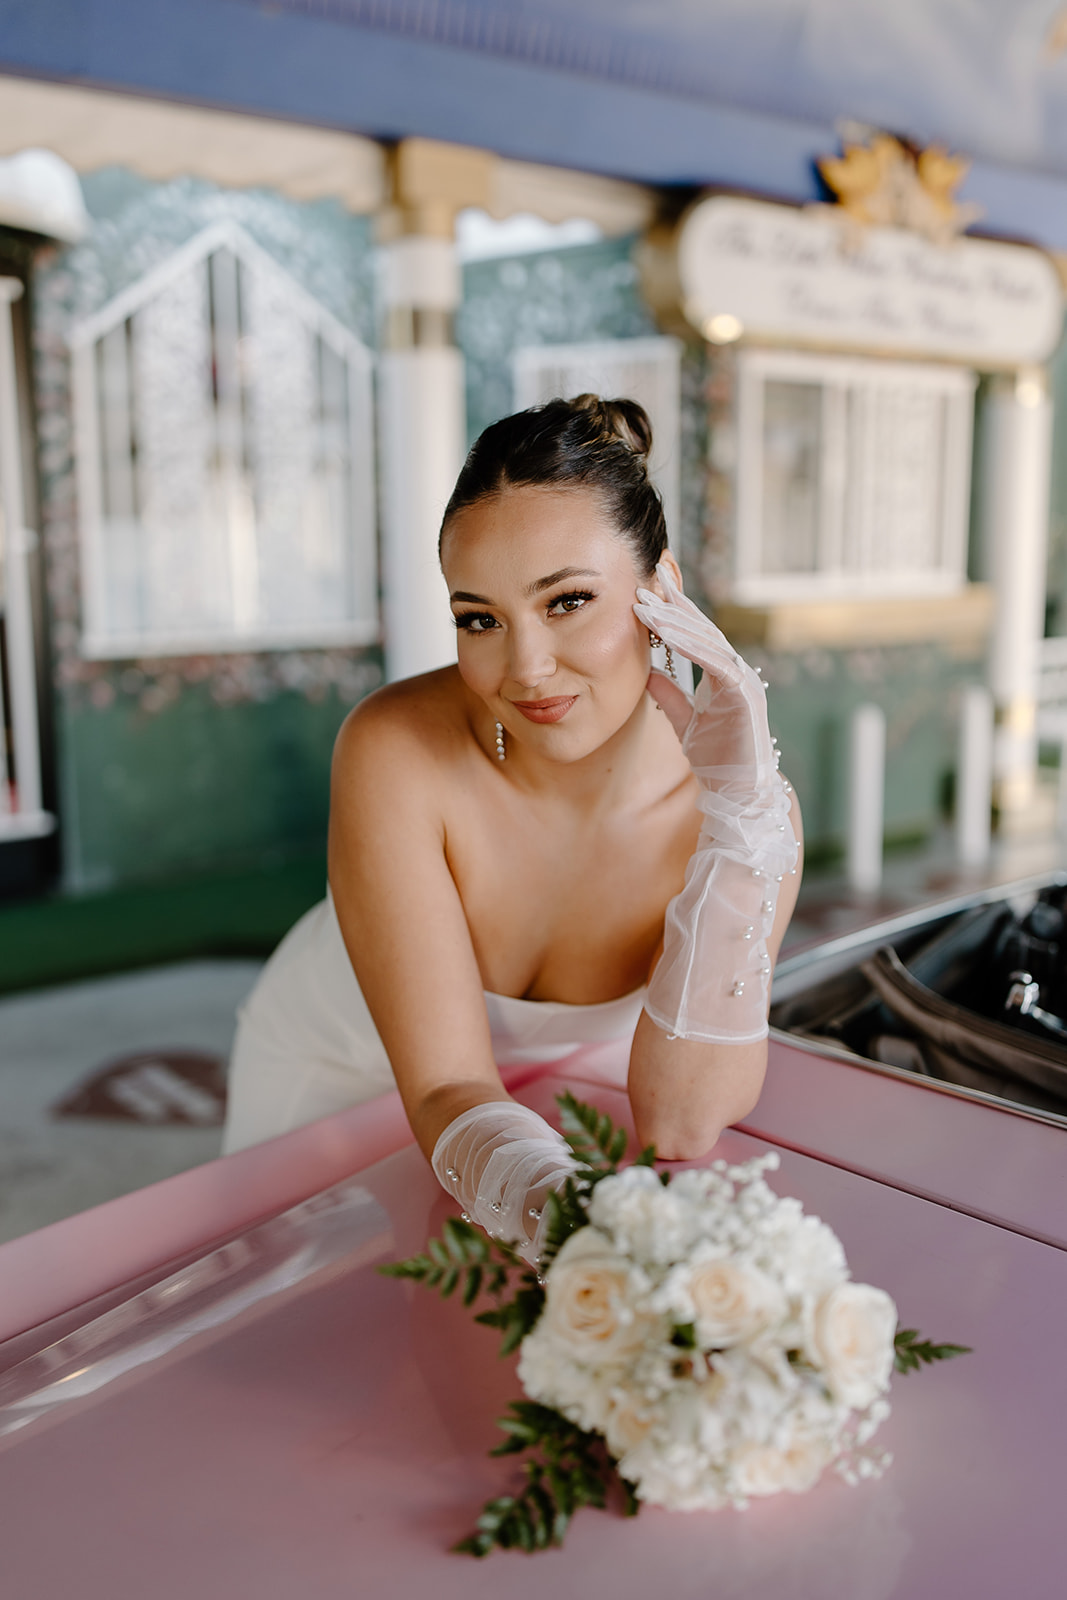 Bride leans onto a pink convertible